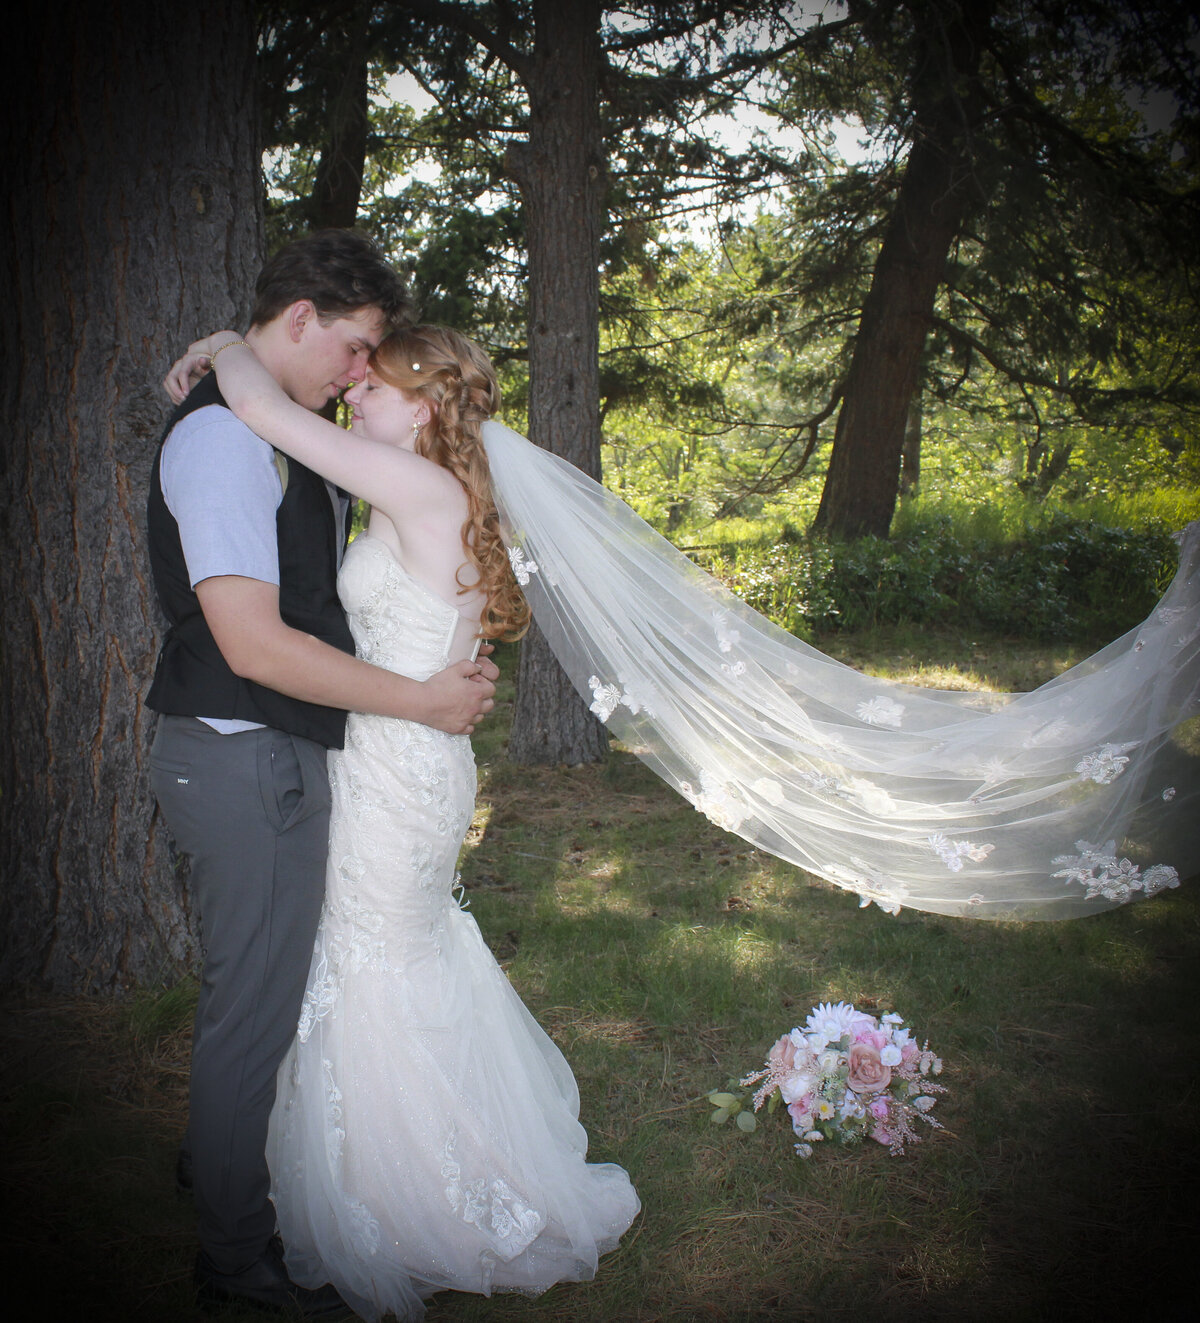 Dreamy image of Bride and Groom